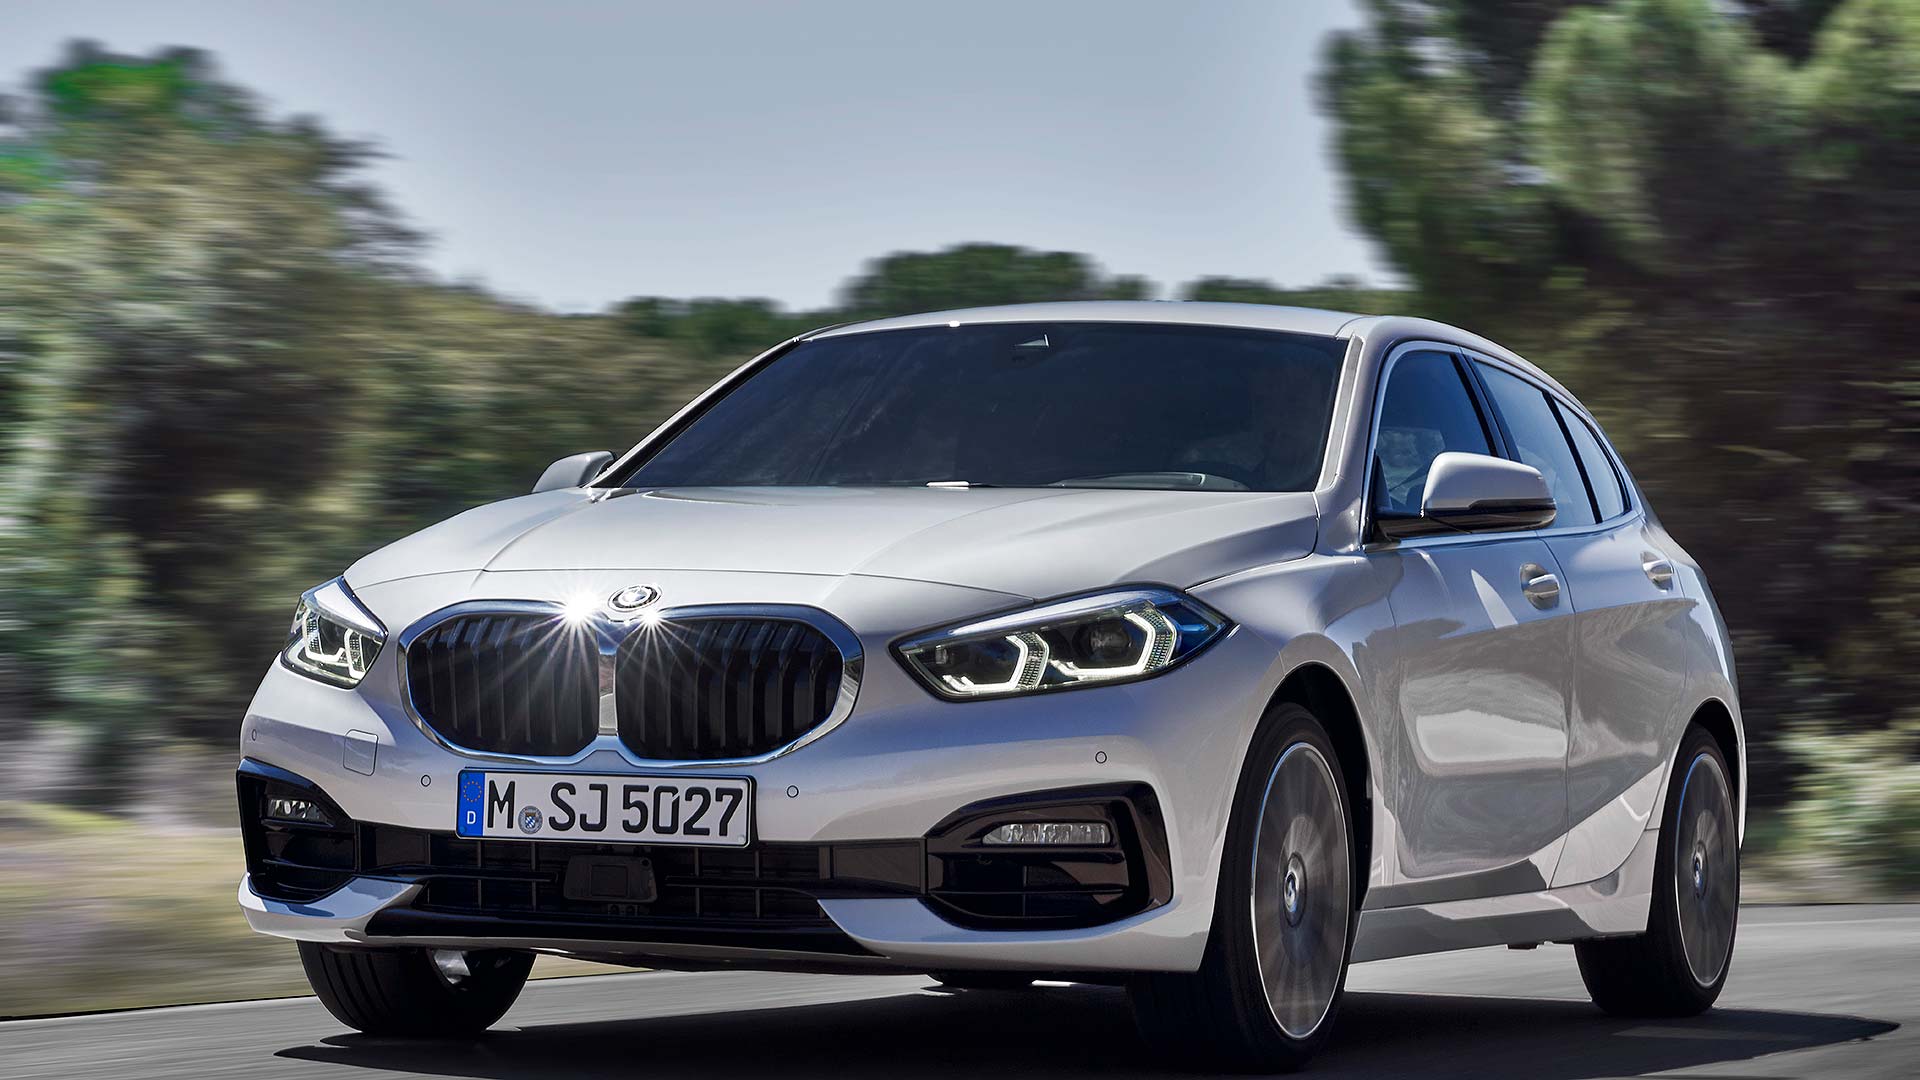 New BMW 1 Series in white